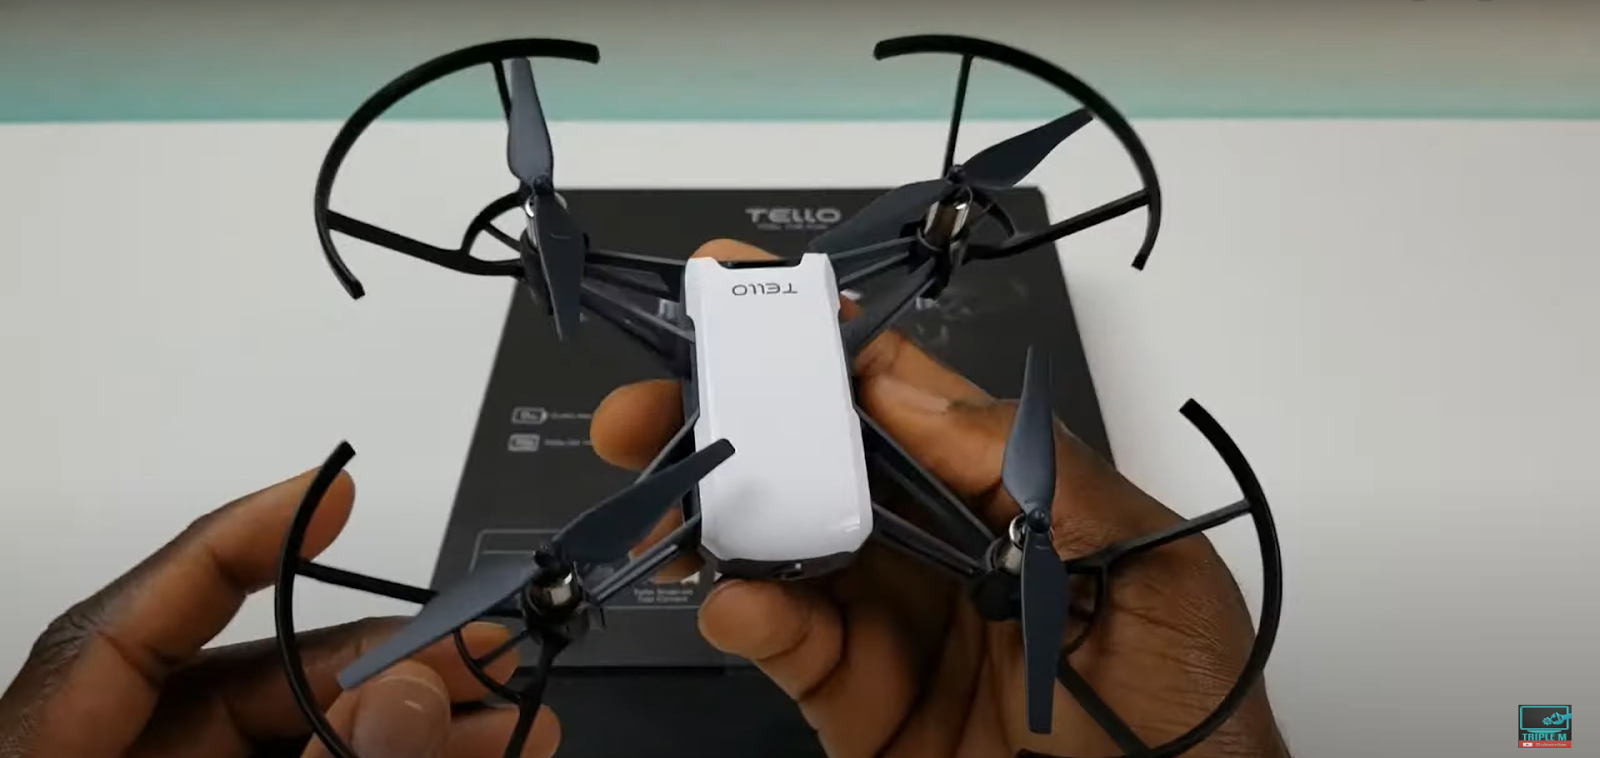 11 Things Tello Drone Owners Should Know – drone-fixer